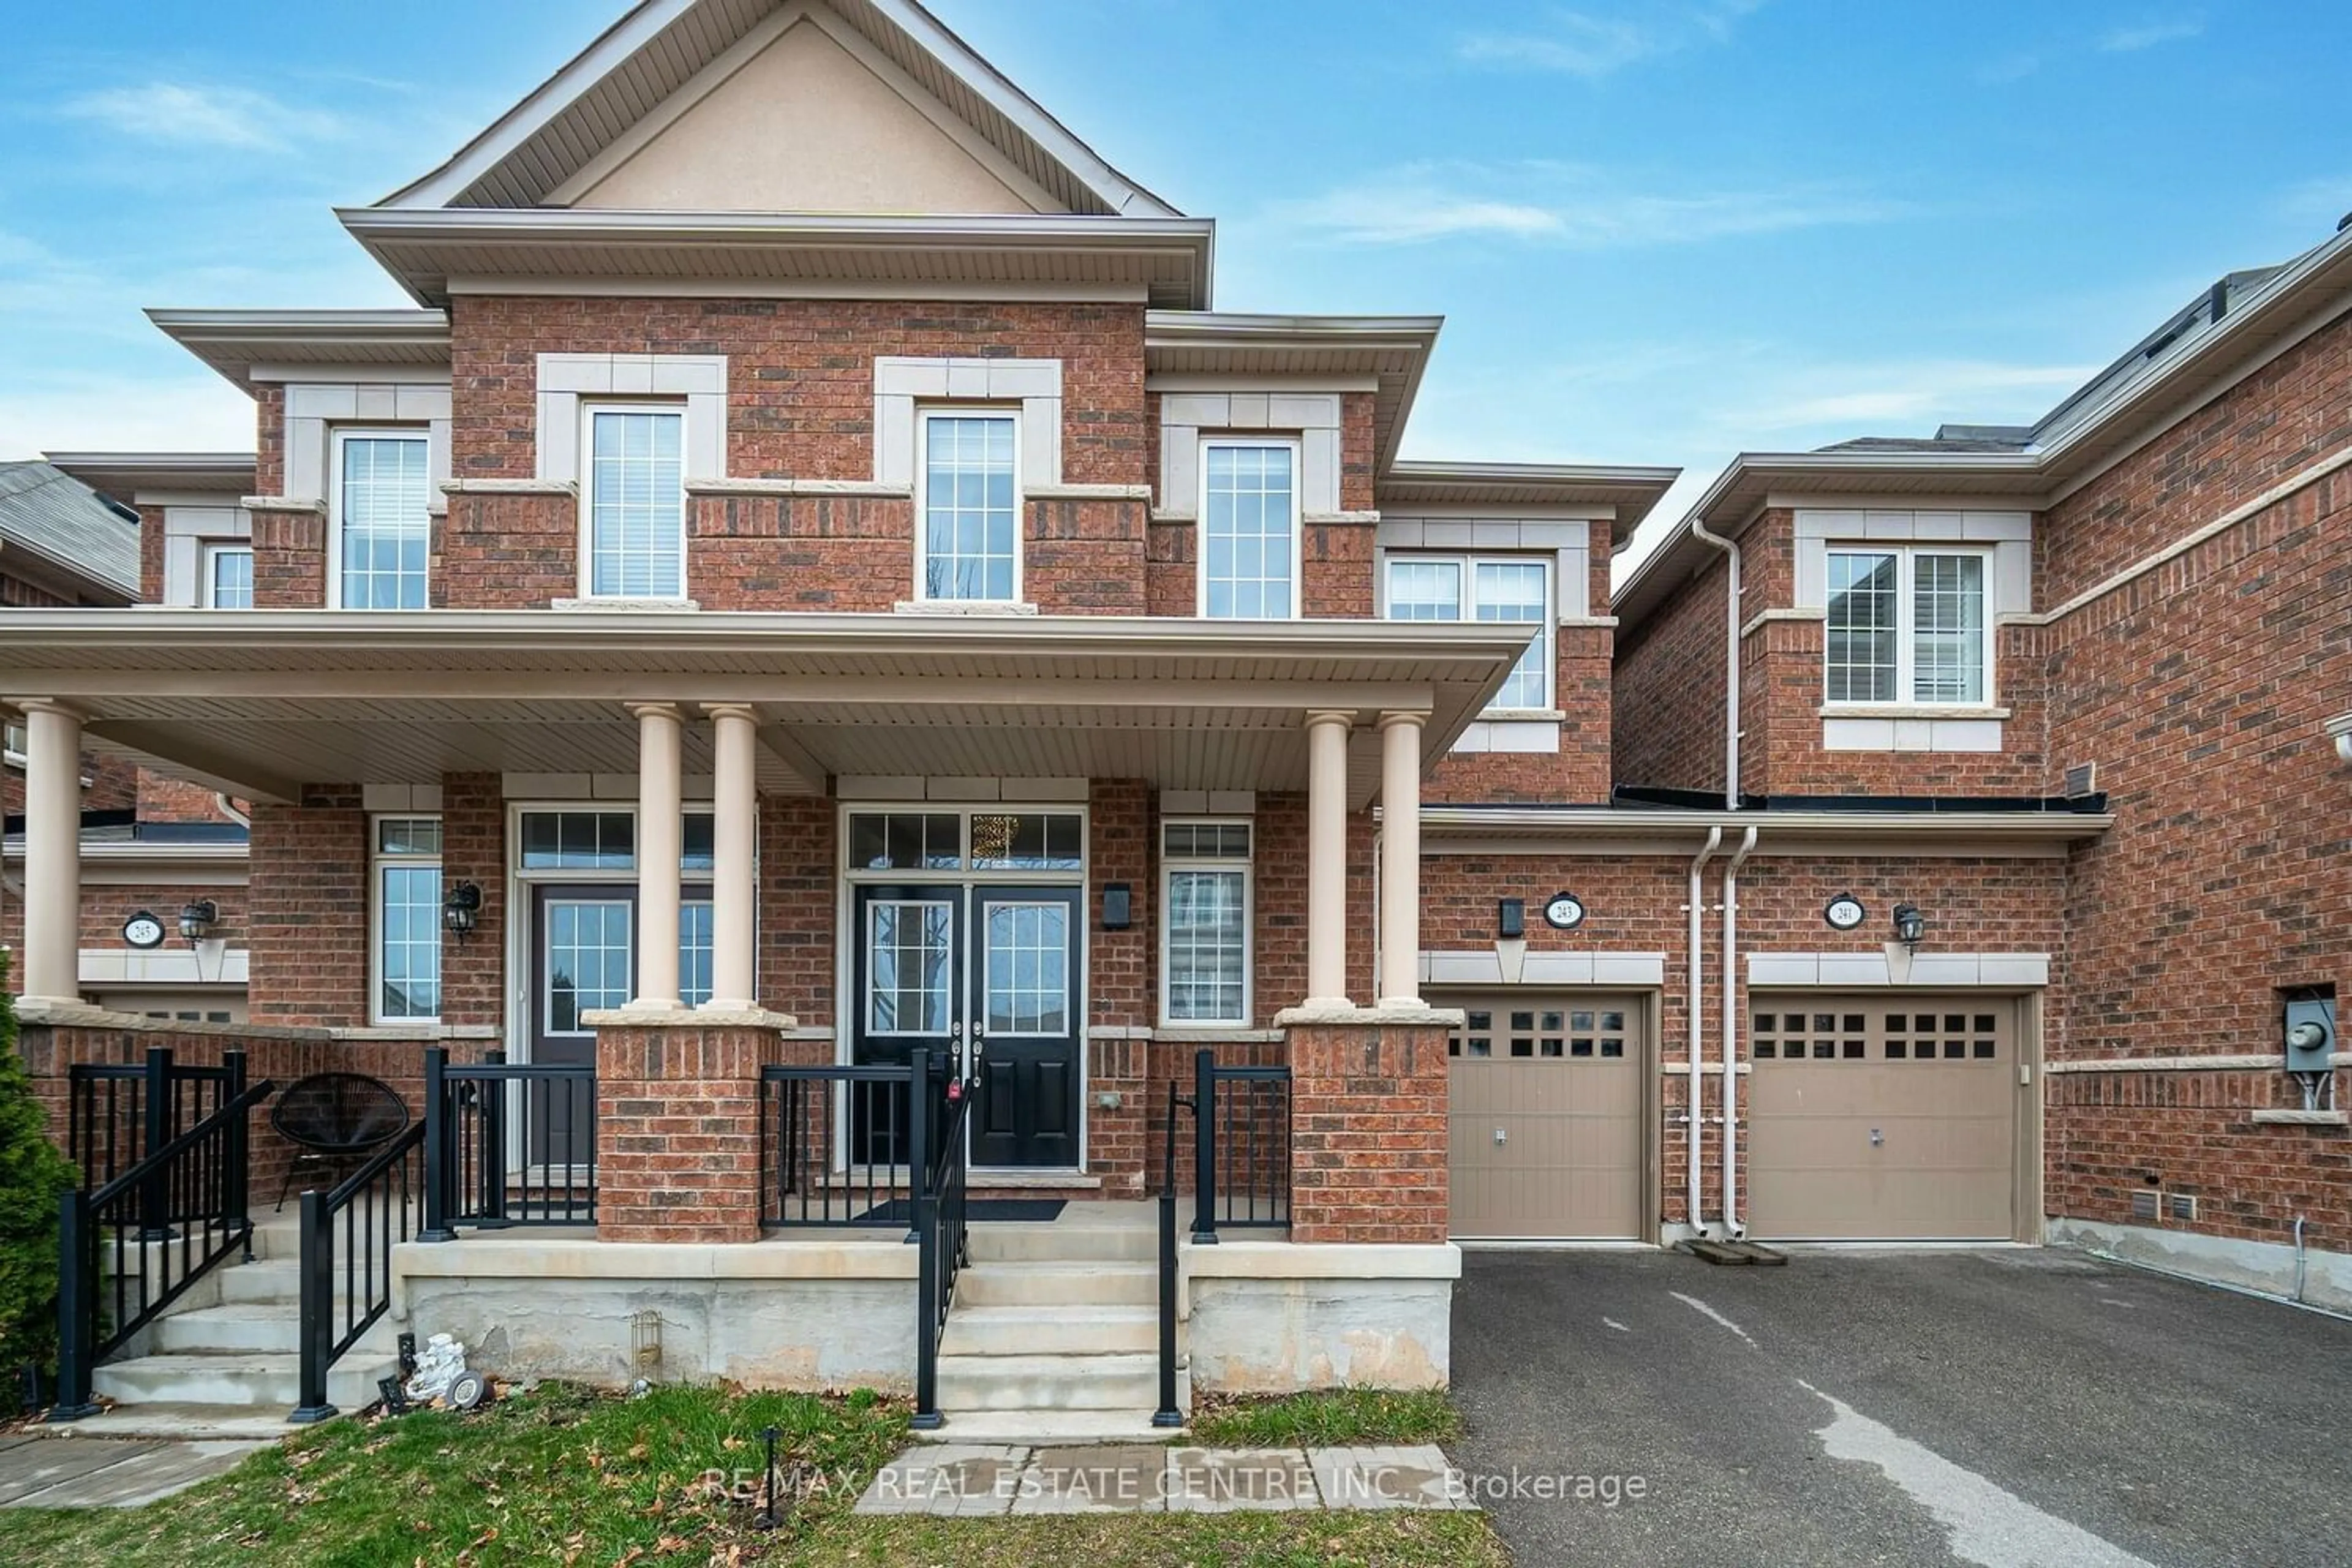 Home with brick exterior material for 243 Sarah Cline Dr, Oakville Ontario L6M 0V3